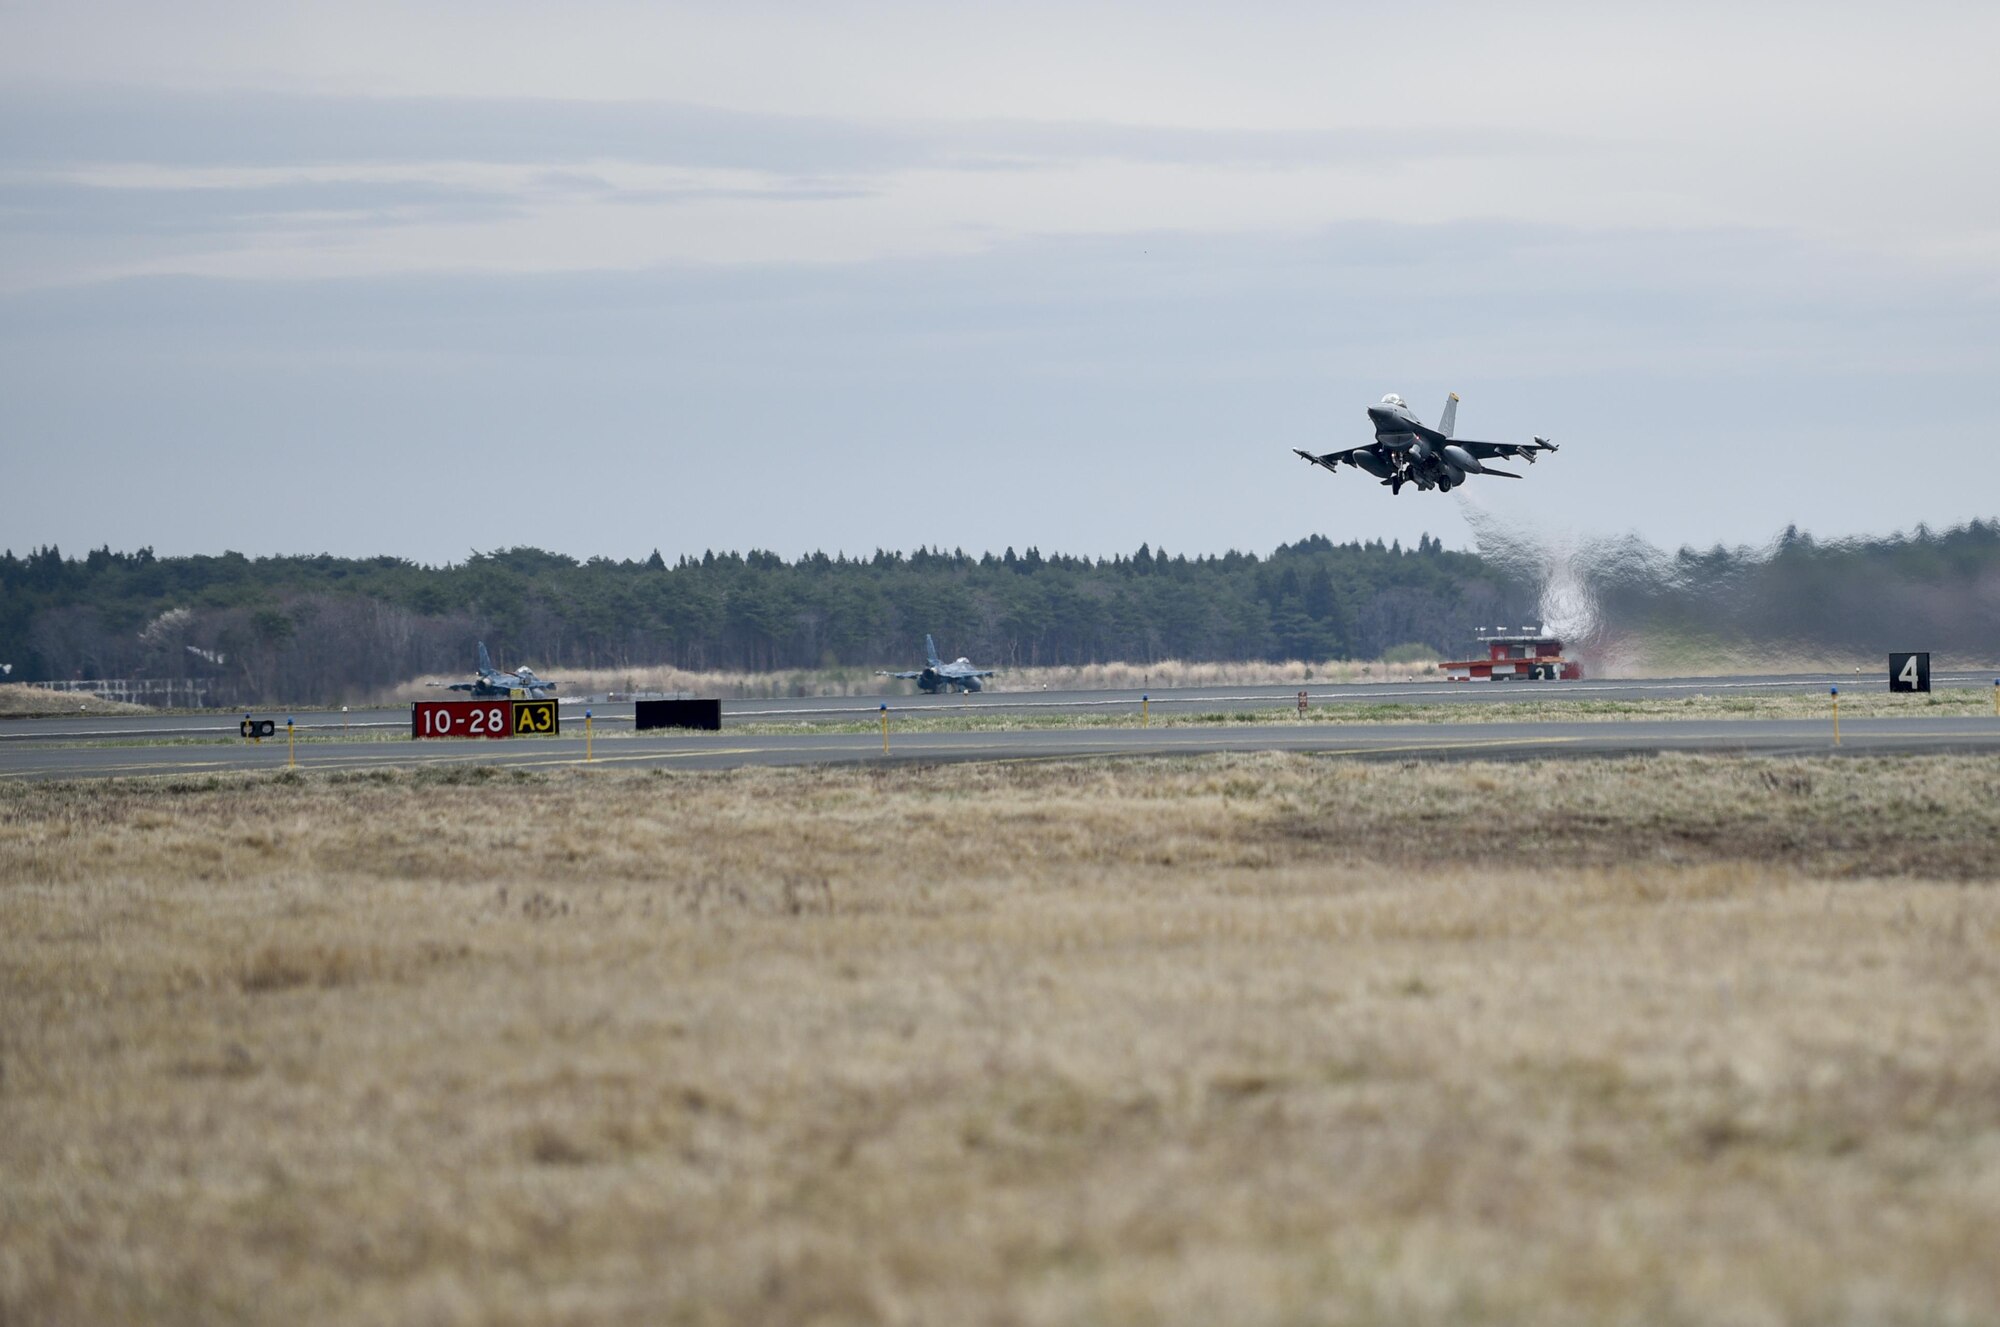 A 14th Fighter Squadron F-16 Fighting Falcon takes off as part of  a bilateral exercise at Misawa Air Base, Japan, April 19, 2017. During the exercise aircraft, simulating enemy aircraft, also known as “Red Air”, are challenged friendly aircraft known as “Blue Air”, this is also known as offensive and defensive counter-air maneuvers. Strengthening the abilities both offensively and defensively in the air is crucial to ensuring security and stability throughout the Indo-Asia-Pacific region. This training allowed those involved a realistic simulation of what to expect in combat. (U.S. Air Force photo by Staff Sgt. Melanie A. Hutto) 